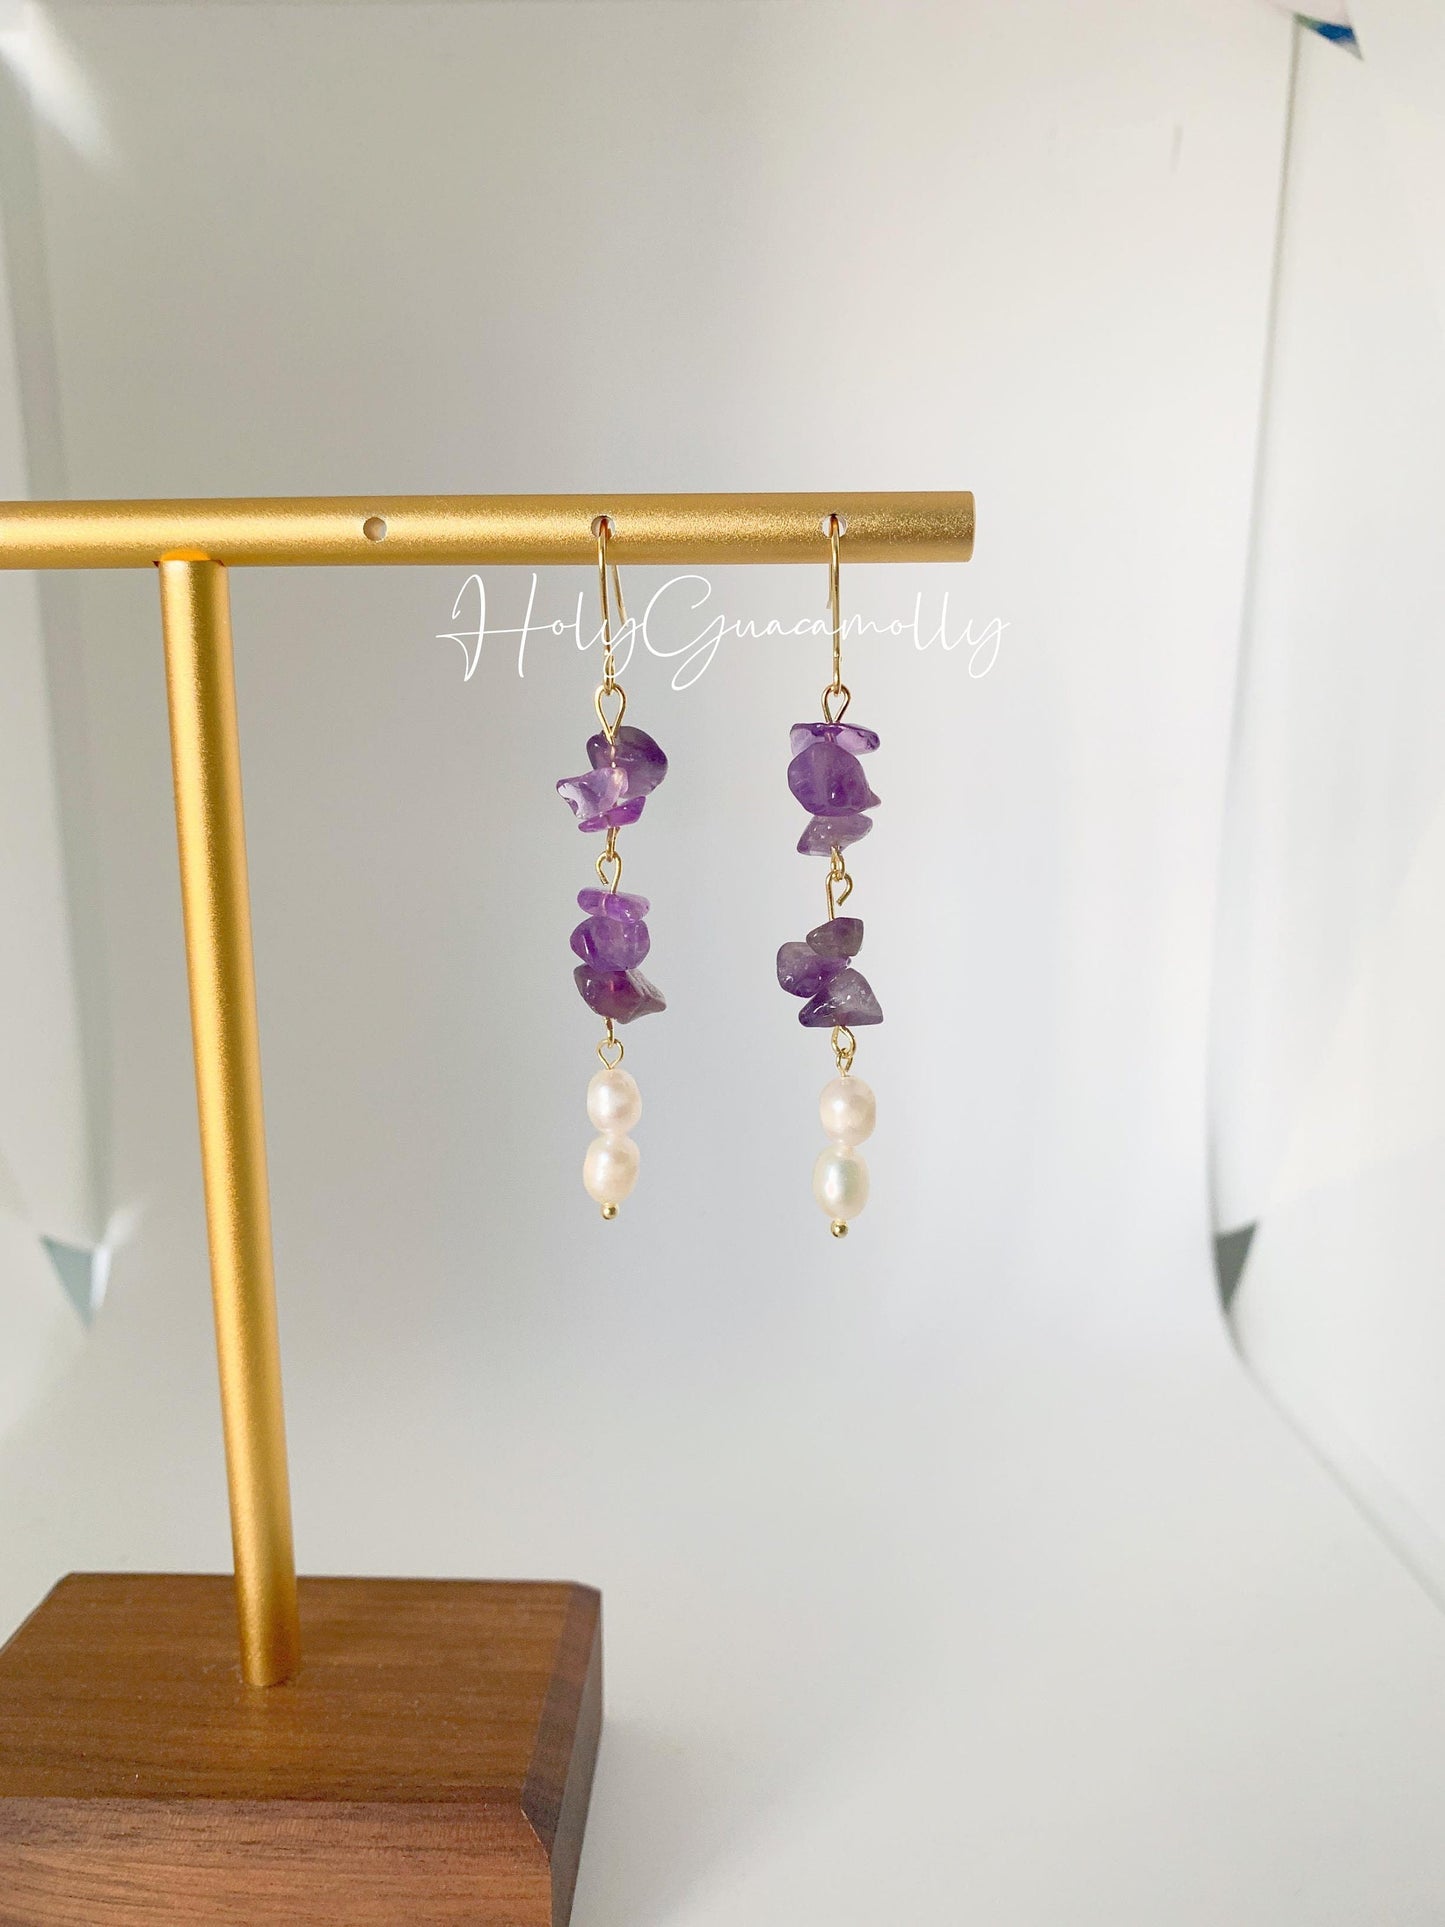 Unique Amethyst and Pearl Earrings